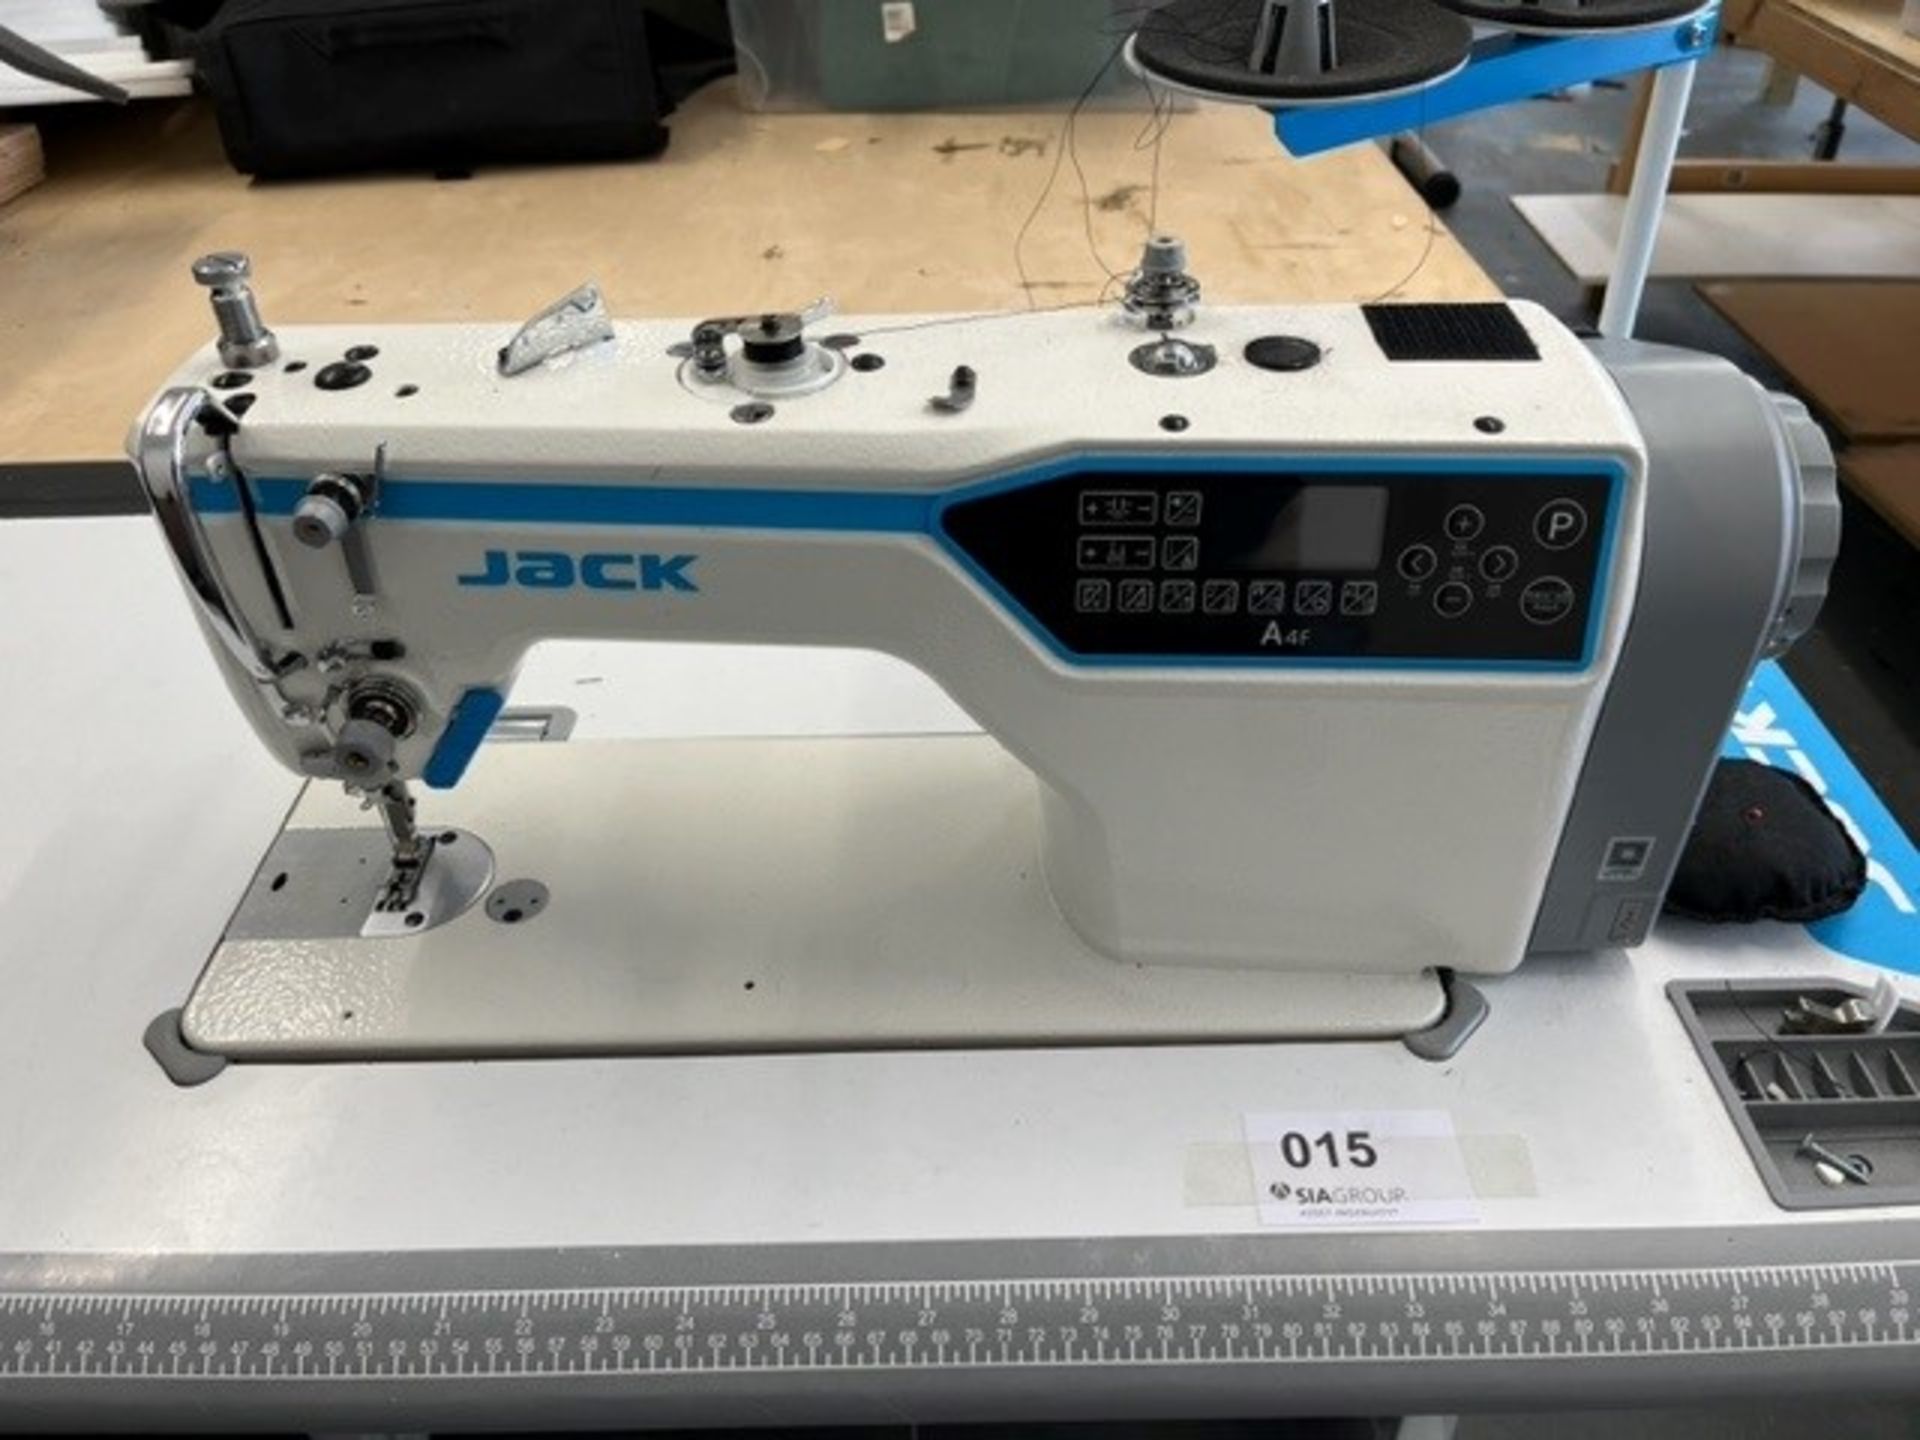 Jack A4F Industrial Fully Automatic Underbed Trimmer Sewing Machine - Image 3 of 5